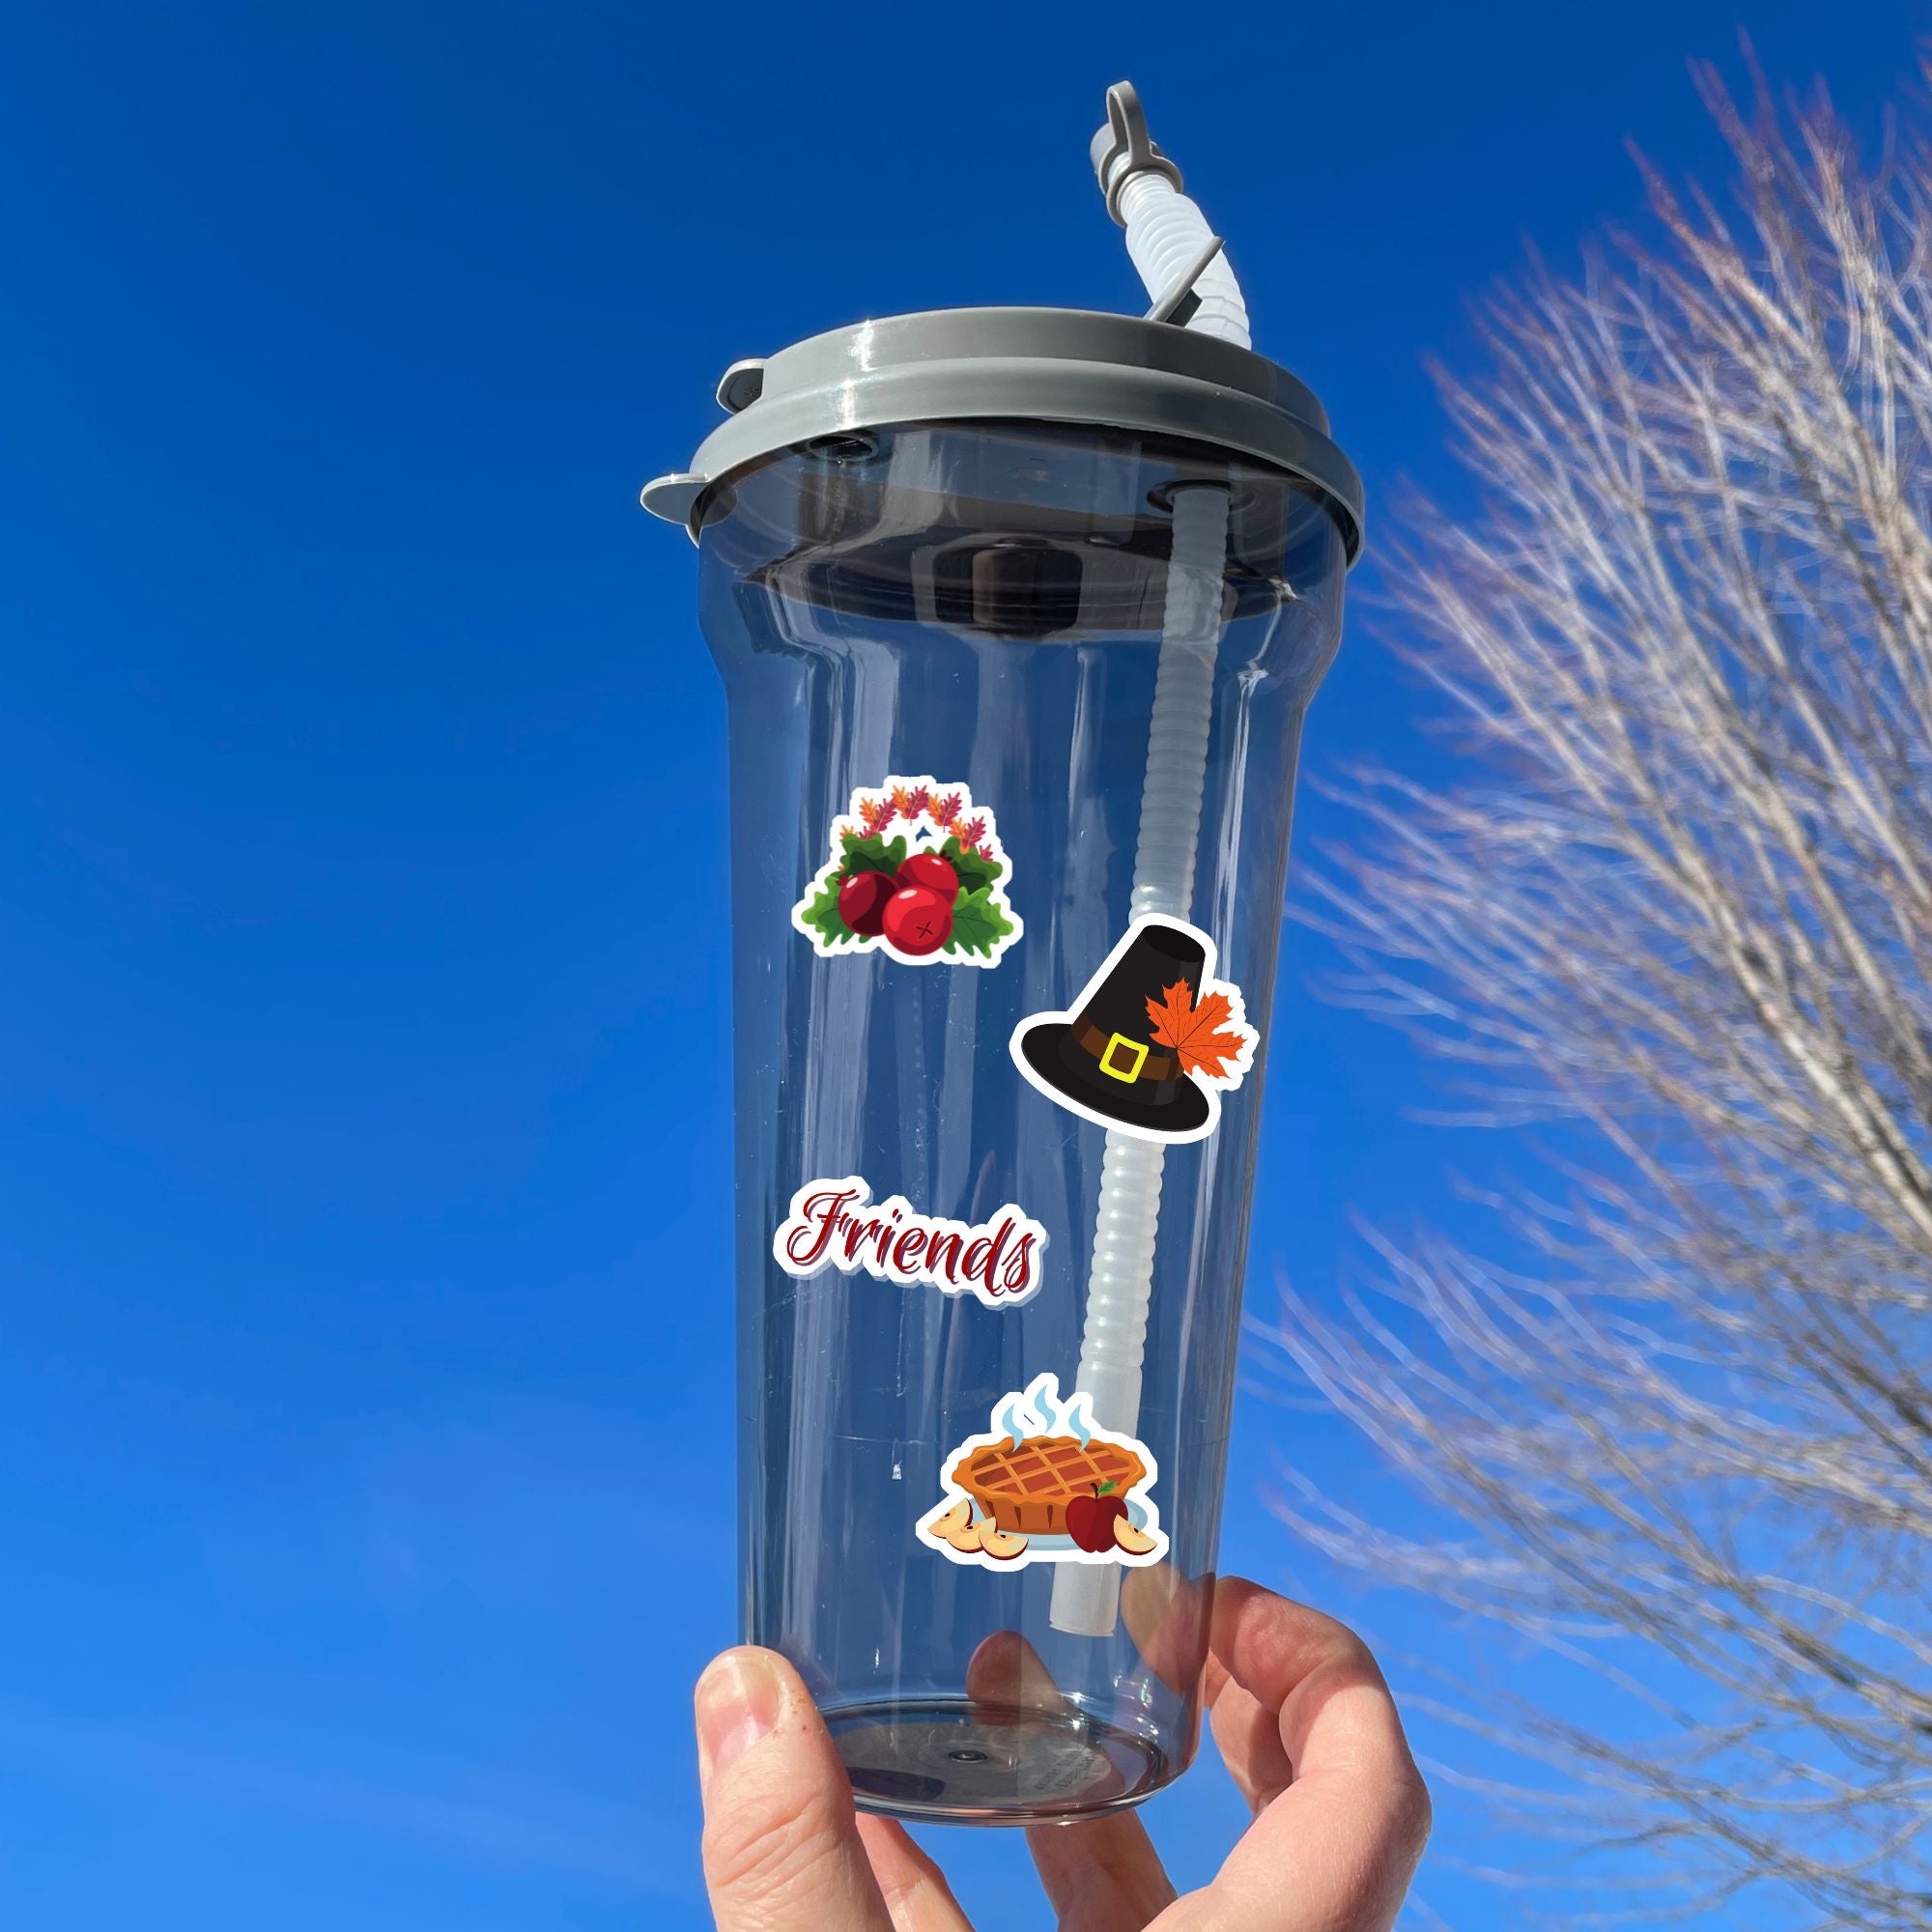 This festive Thanksgiving sticker sheet is perfect for decorating or scrapbooking. It features all of your favorite Thanksgiving images and inspirational sayings. Let the feast begin! This image shows a water bottle with stickers of a cranberry garland, a pilgrim hat, the word friends, and an apple pie.